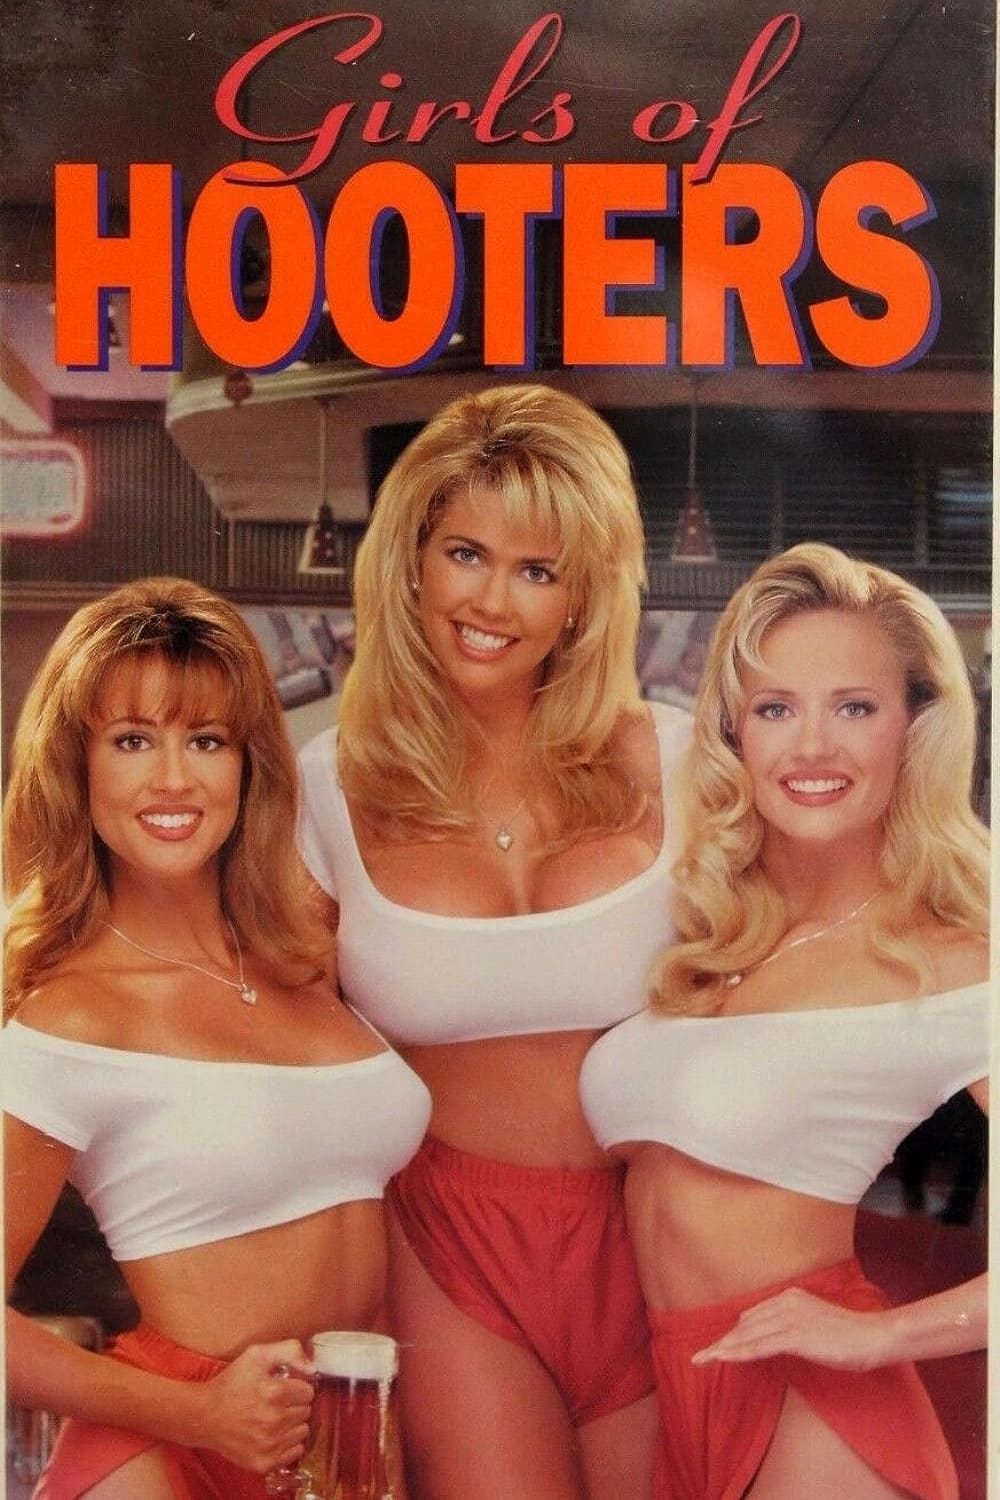 Playboy's Girls of Hooters